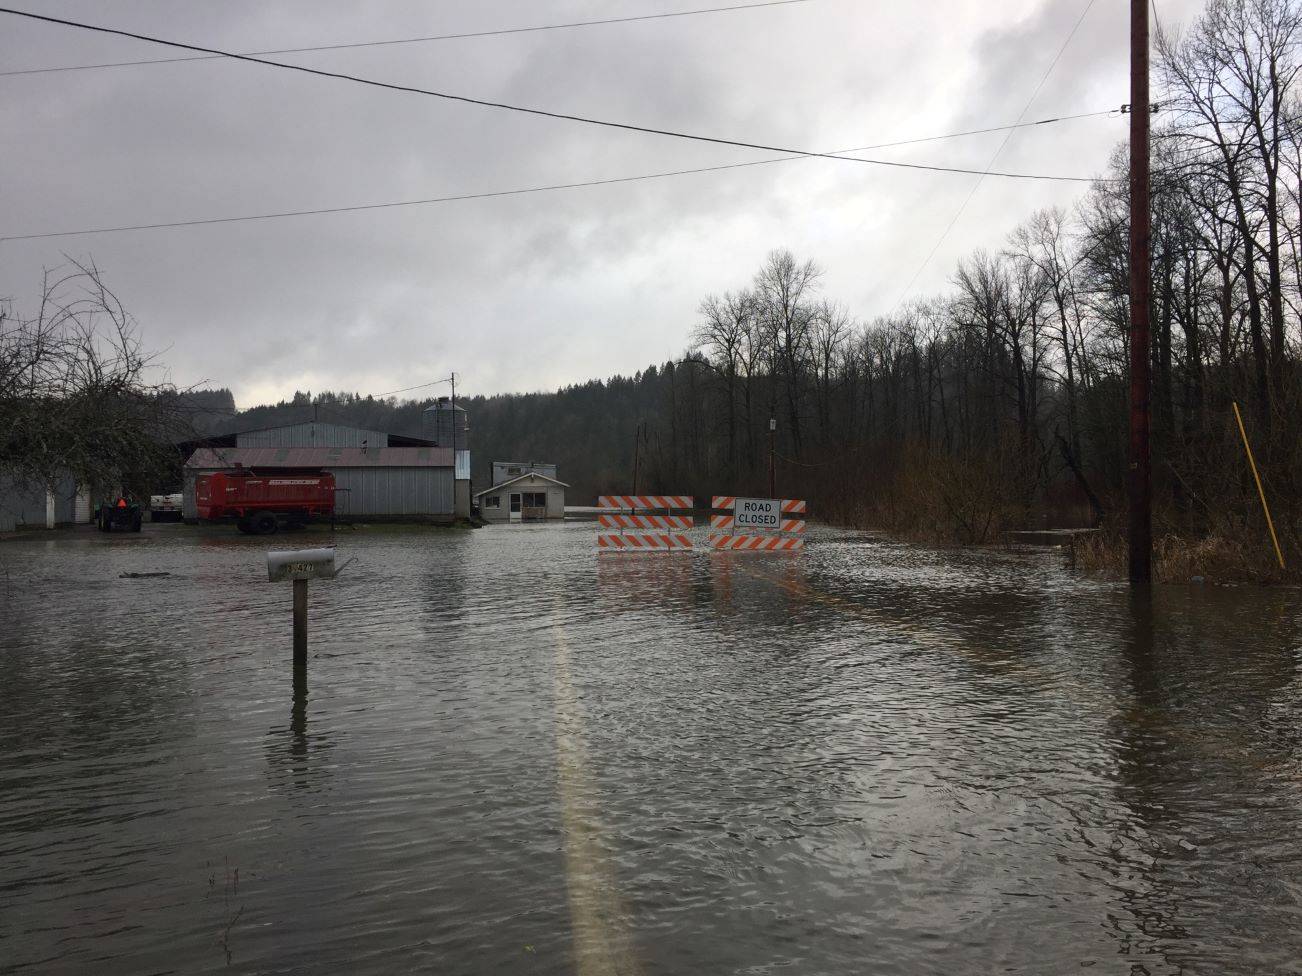 Flood waters inundated Carnation Feb. 6-7. On Friday, Feb. 7, Tolt Hill Road was closed in Carnation. William Shaw/staff photo